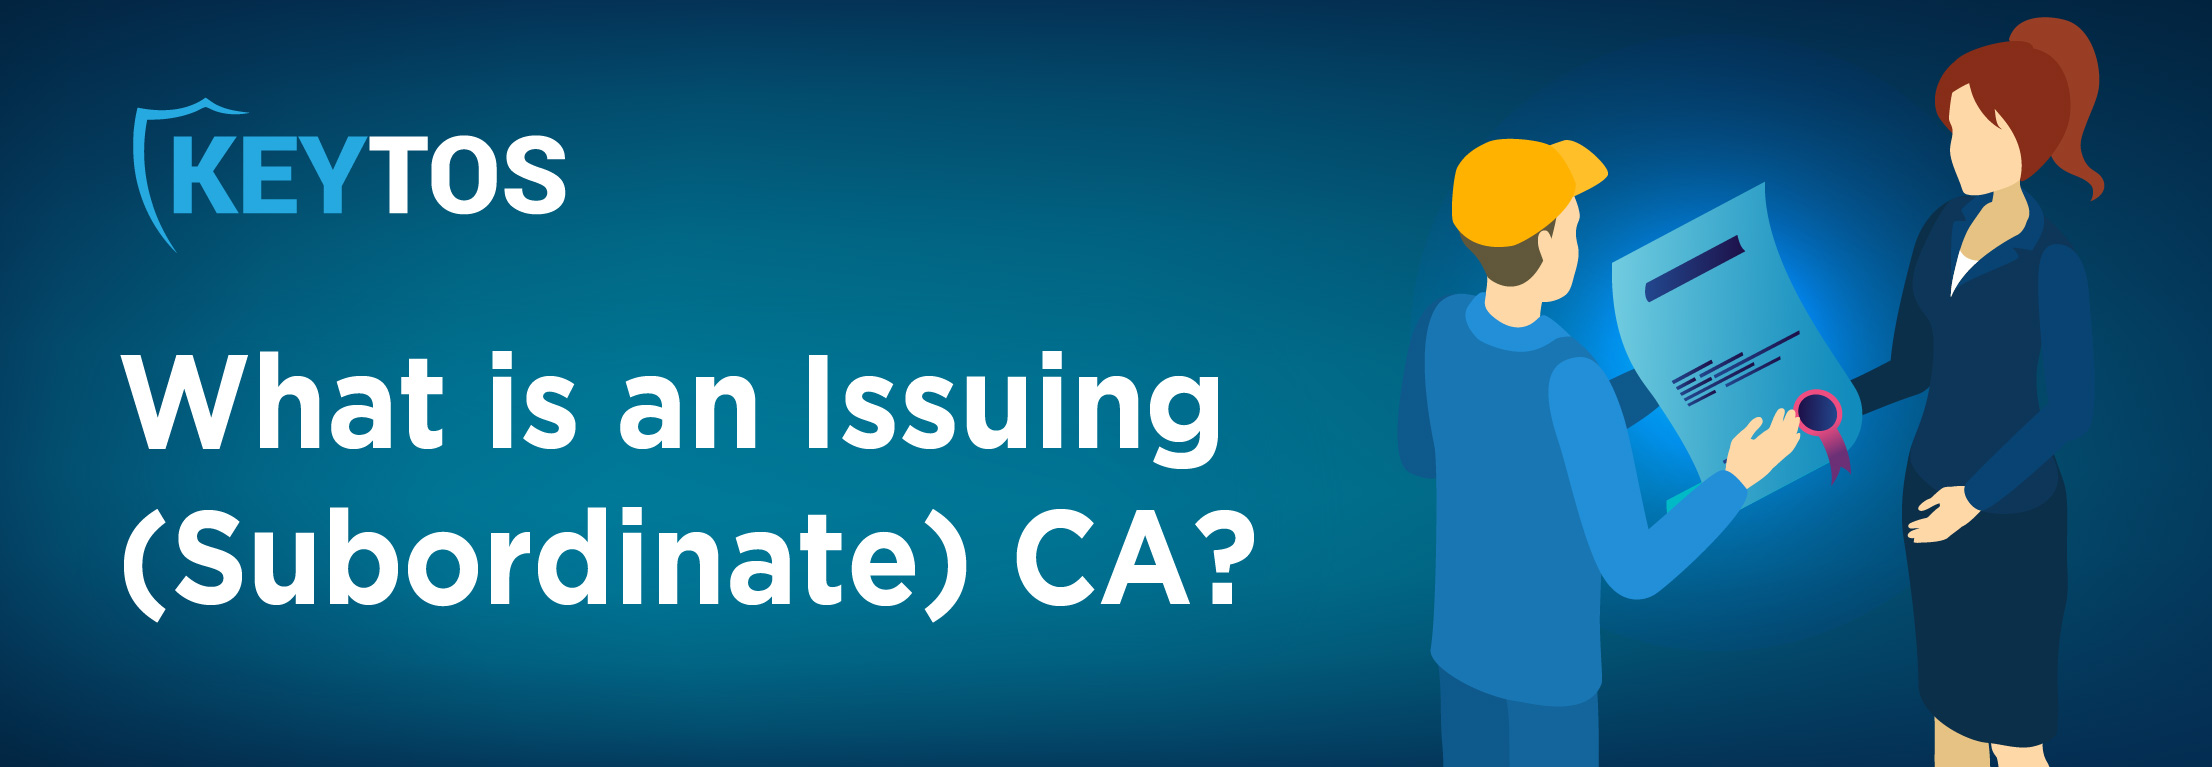 What is a Subordinate Certificate Authority? What is an Issuing CA?